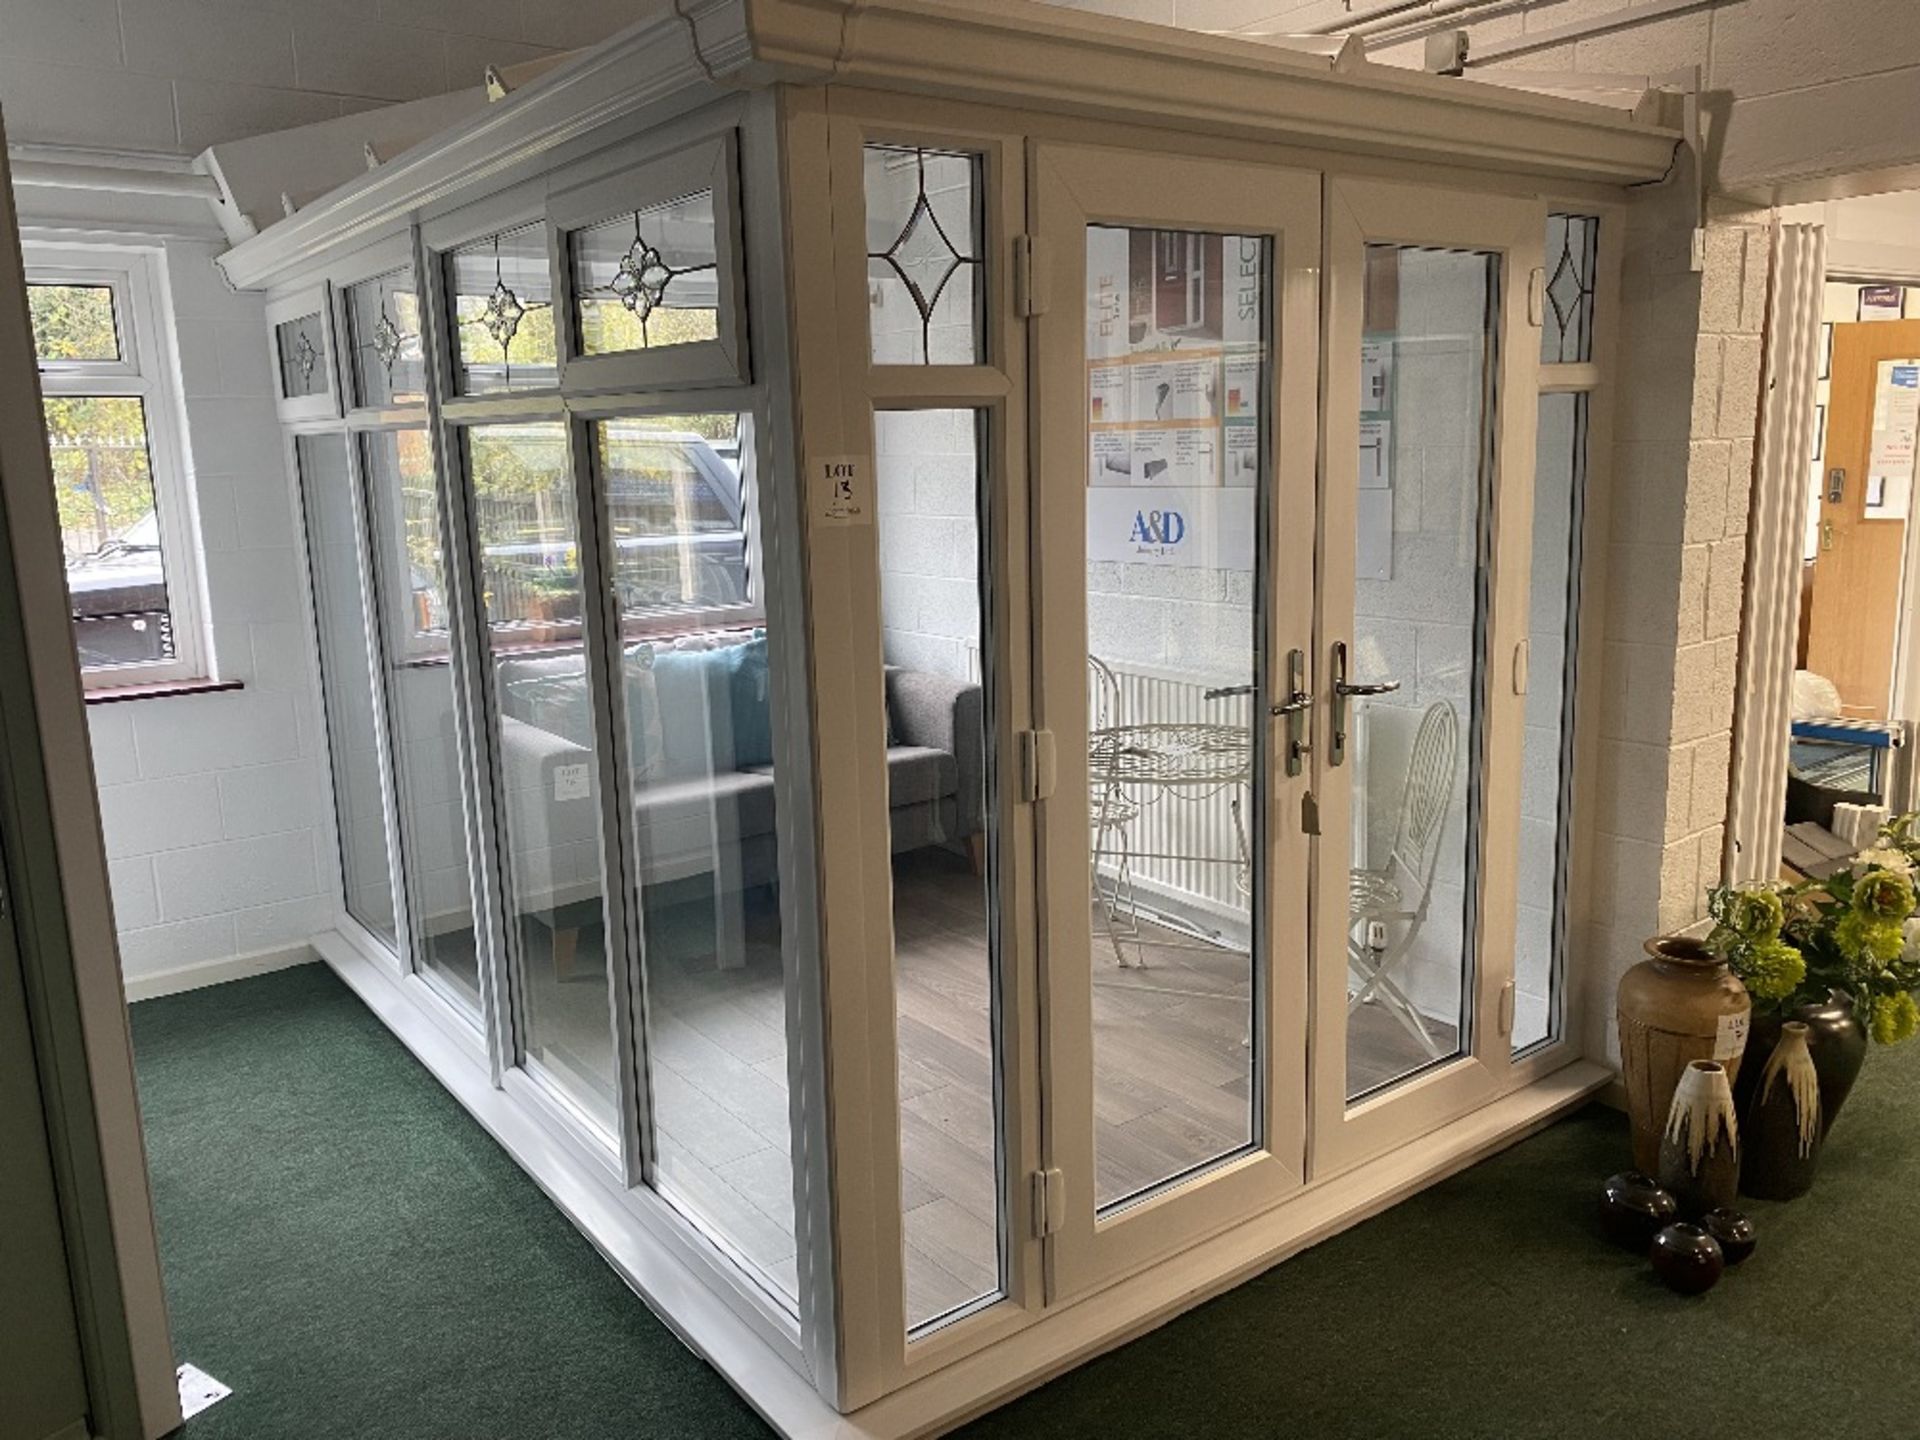 White upvc glazed corner conservatory with French doors and roof structure, with key, approximate